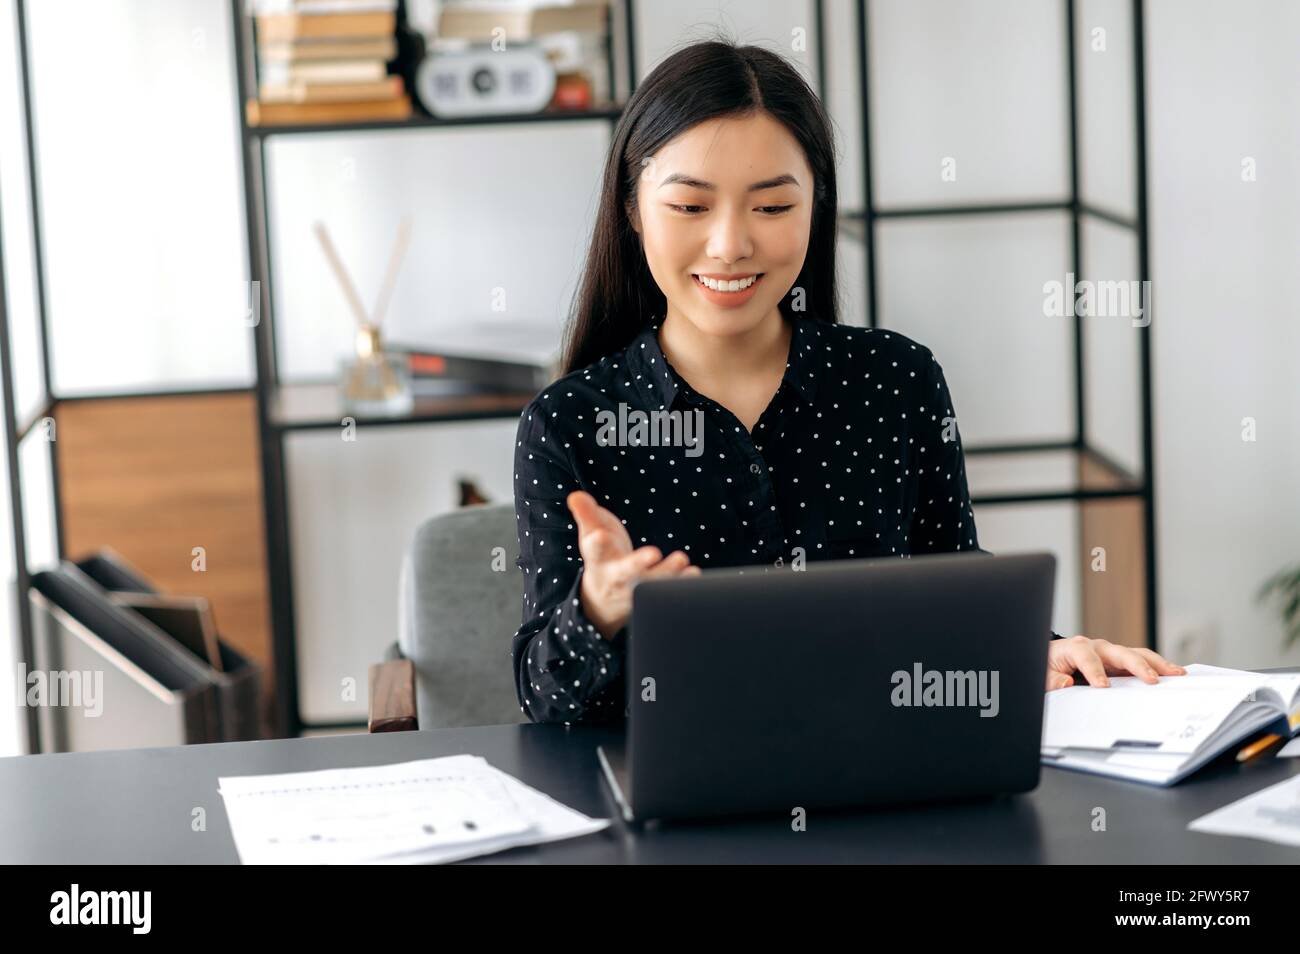 Charismatic successful confident Asian business lady, freelancer, manager, using laptop, talking on video conference with client or colleague, discussing business project, gesturing with hand, smiling Stock Photo